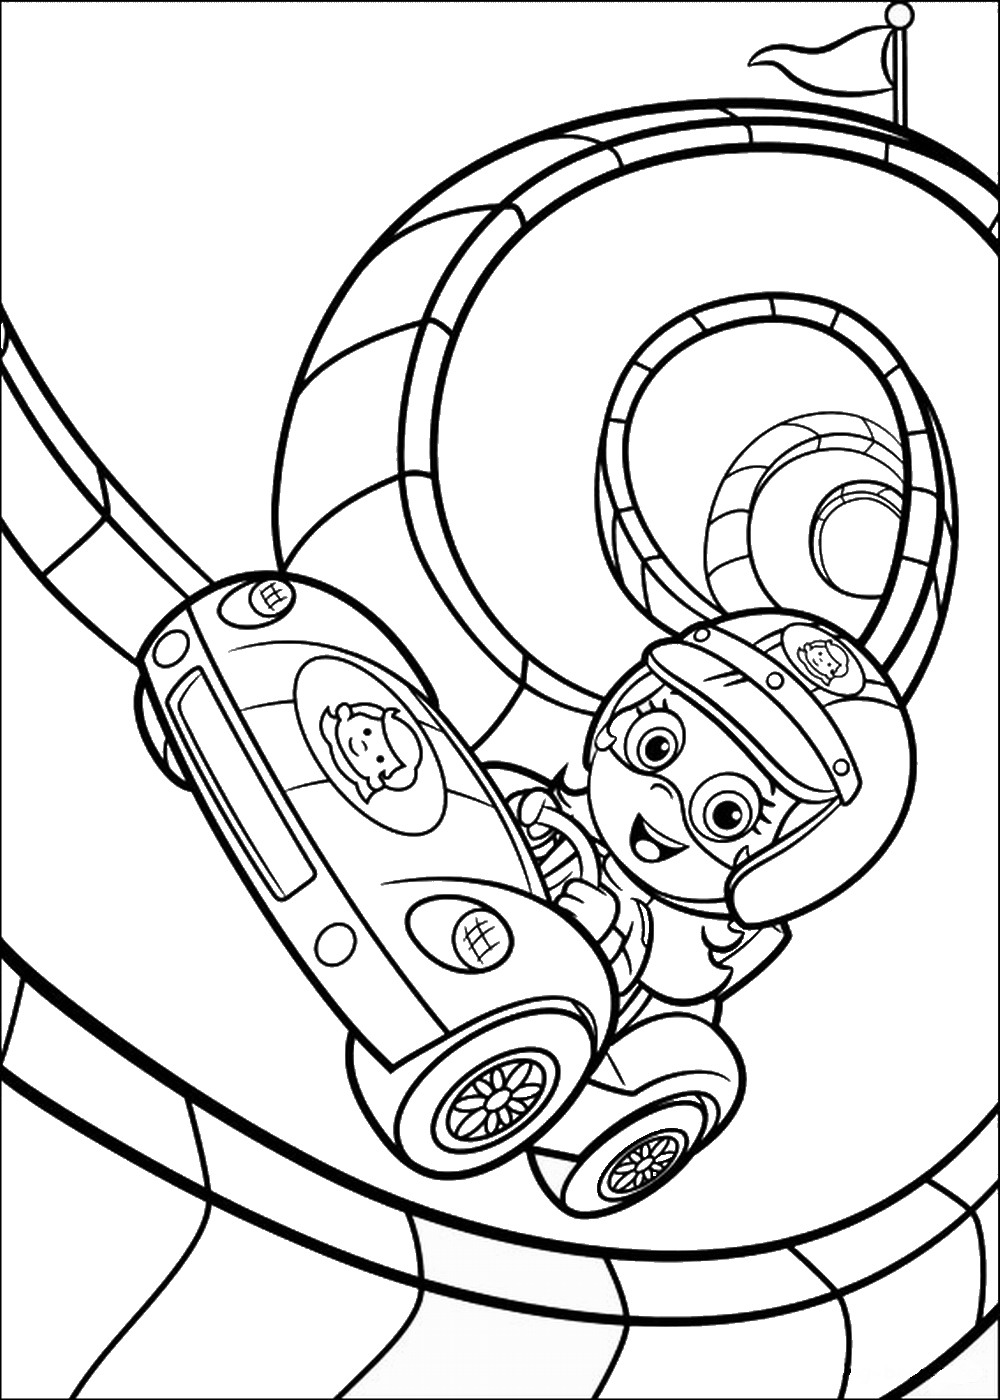 Bubble Guppies Coloring Pages - Best Coloring Pages For Kids